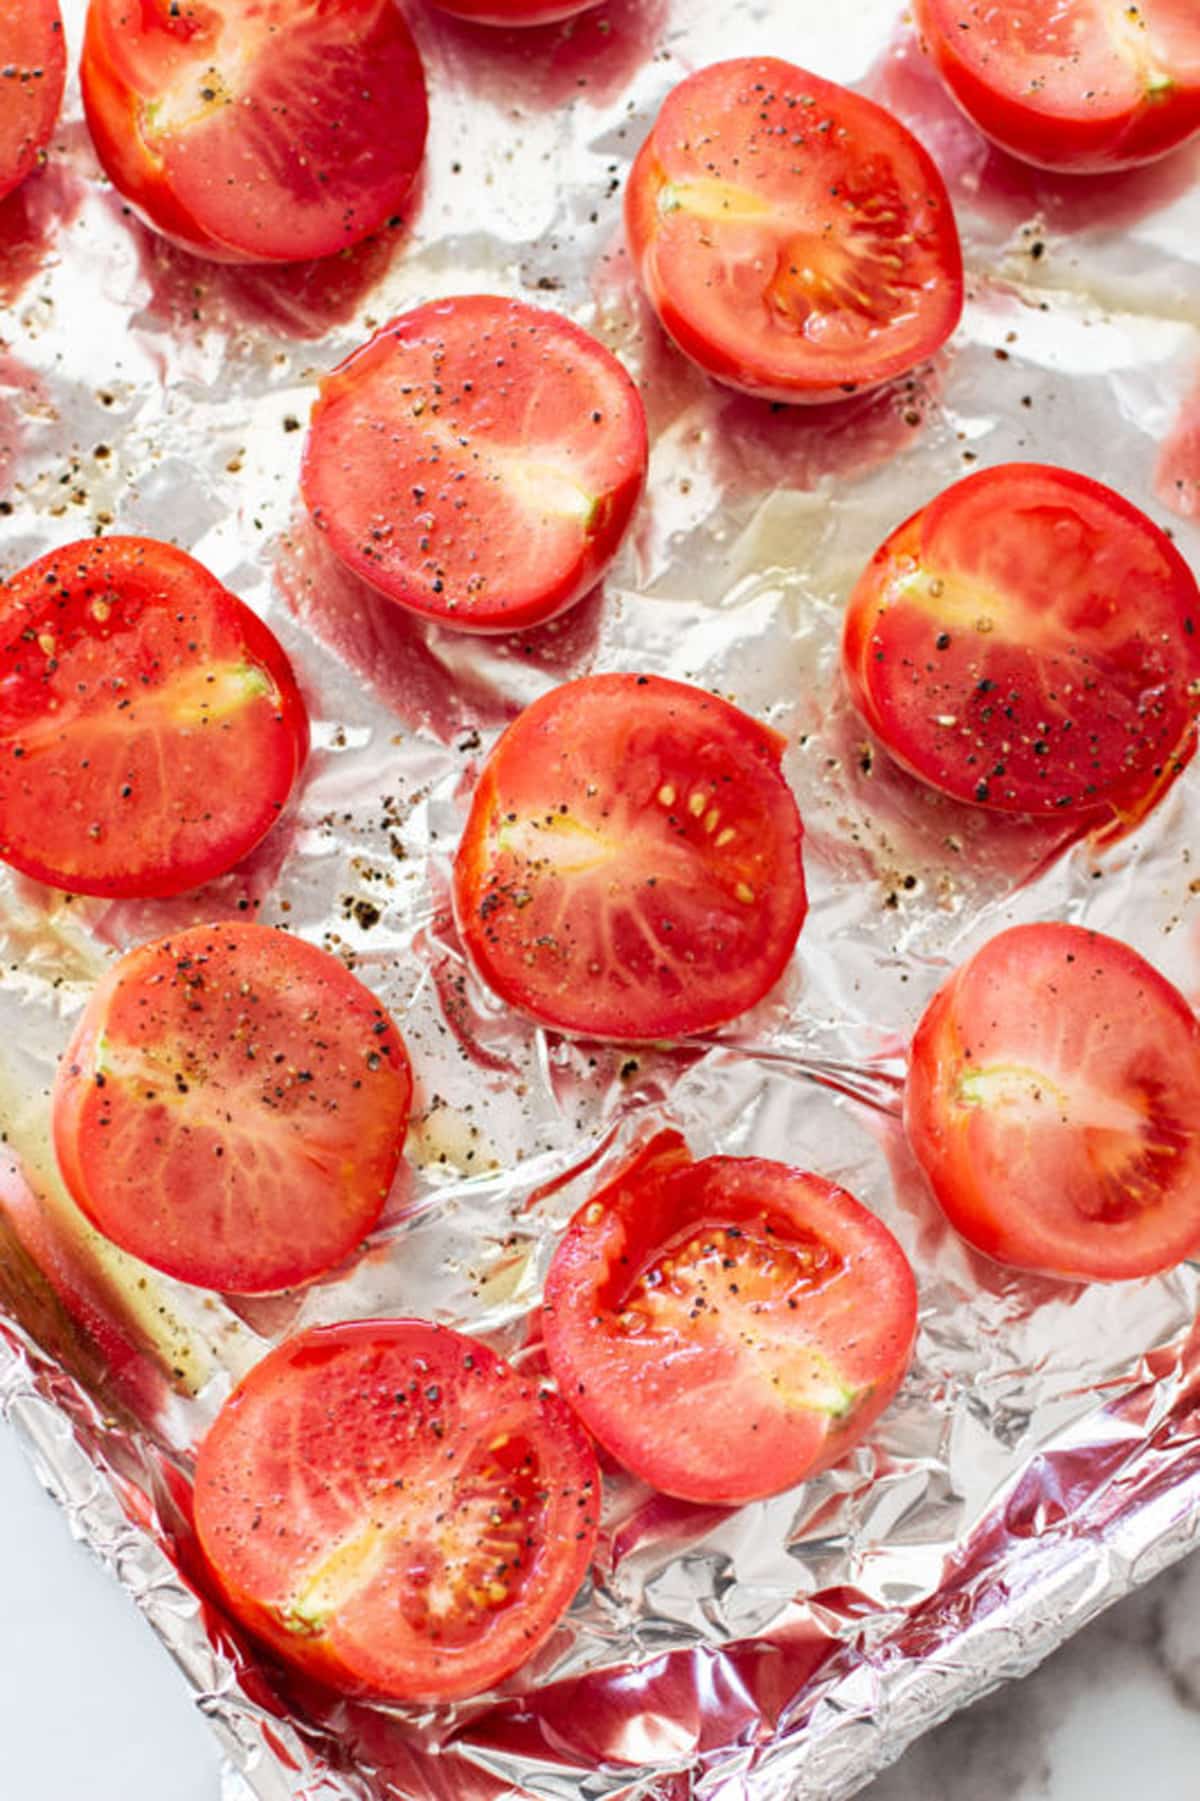 Cookie sheet lined with aluminum foil topped with fresh tomatoes cut lengthwise topped with salt and pepper.